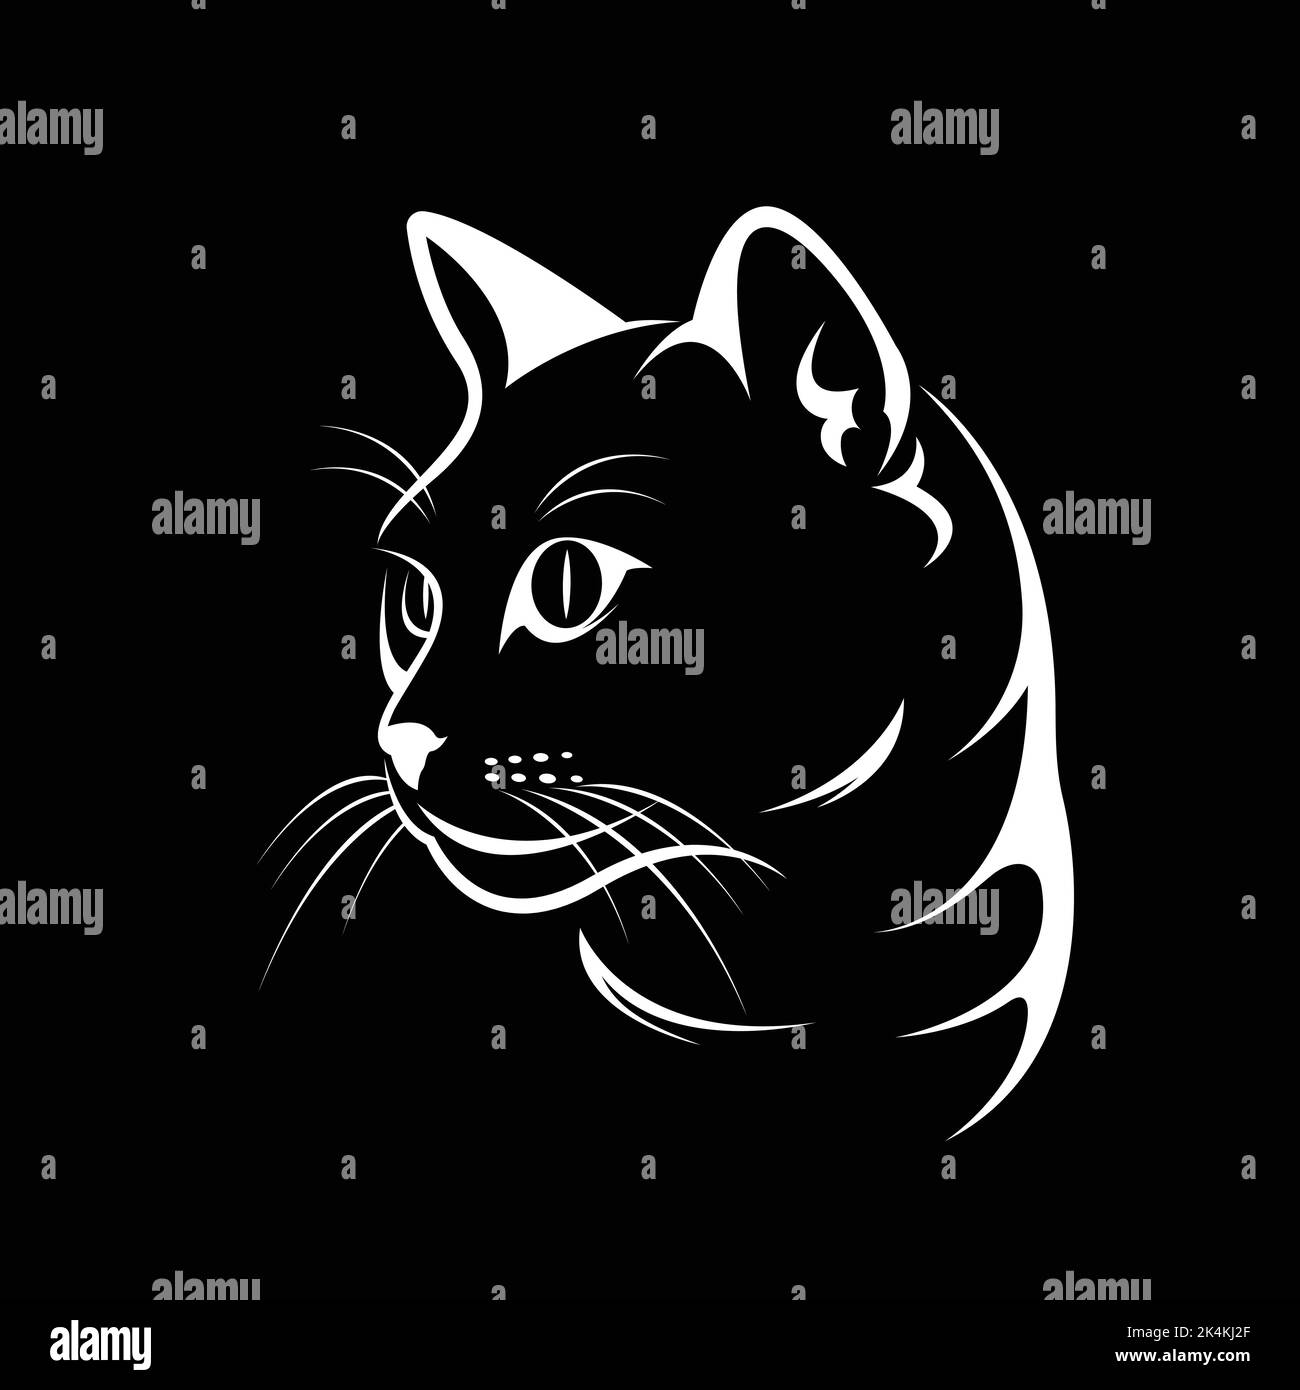 Vector of a cat face design on black background, Vector illustration. Pet. Easy editable layered vector illustration. Stock Vector